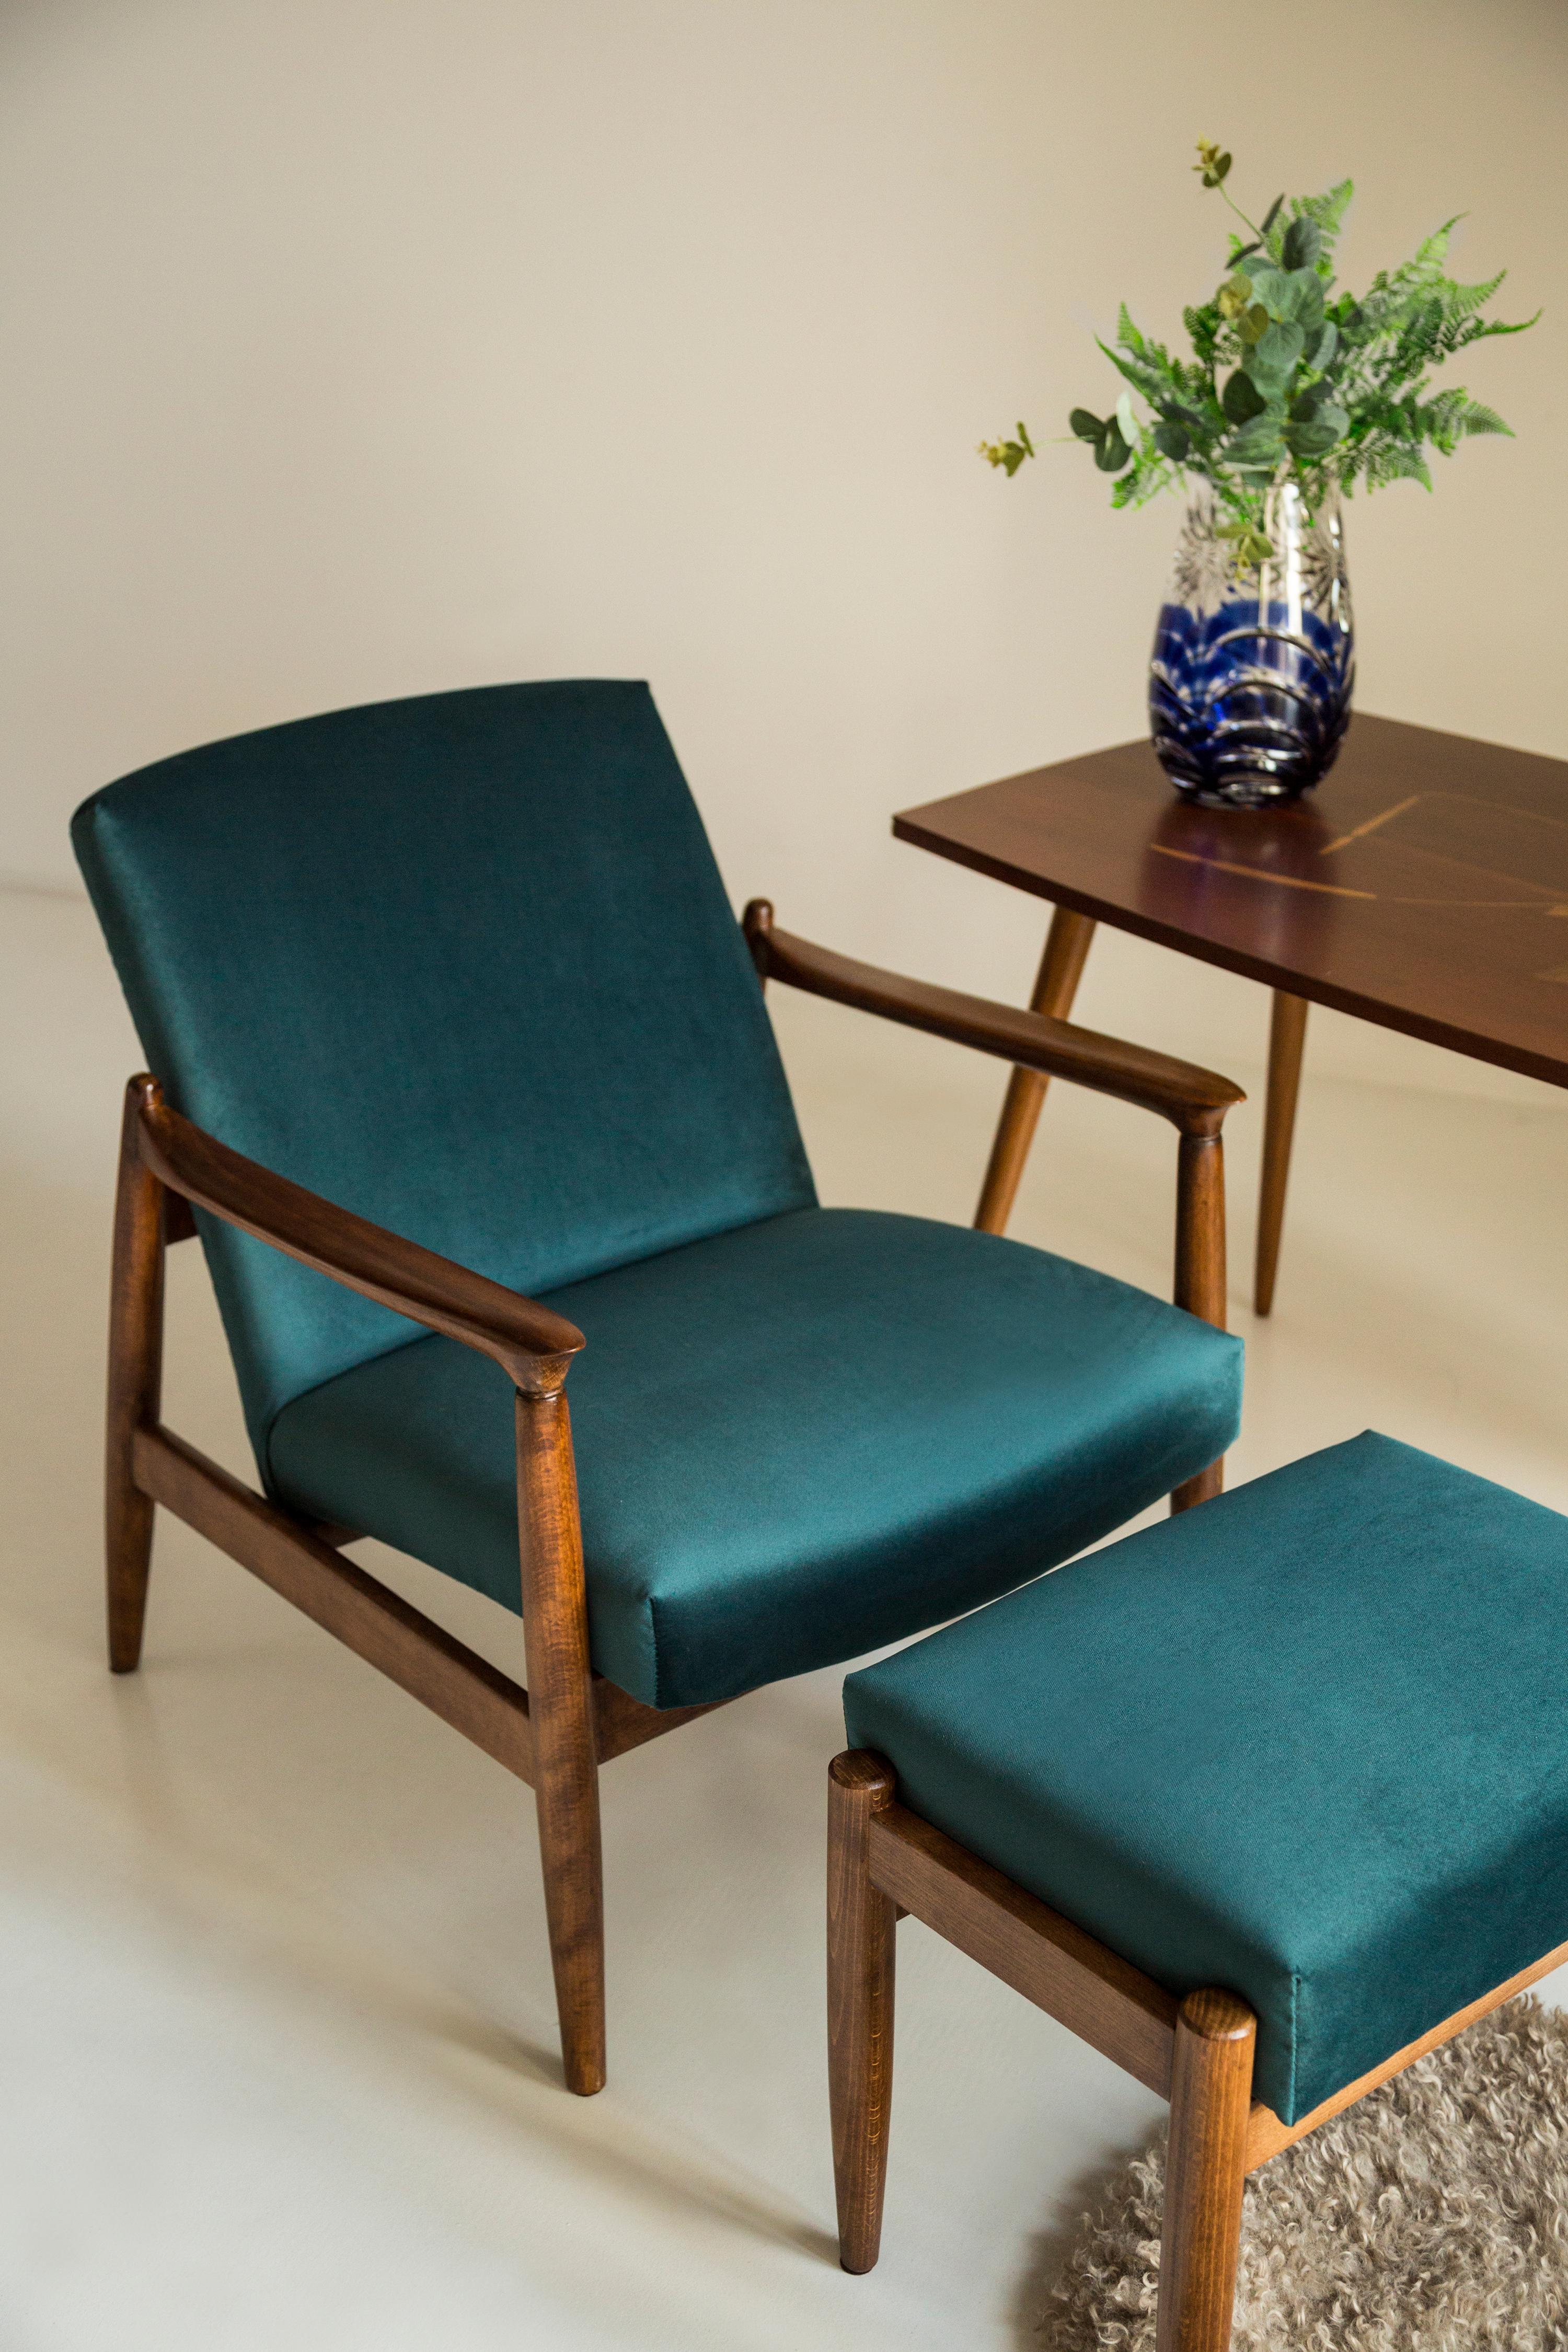 A pair of petrol blue armchairs, designed by Edmund Homa. The armchairs were made in the 1960s in the Gosciecinska Furniture Factory. They are made from solid beechwood. The GFM type armchair is regarded one of the best Polish armchair design from